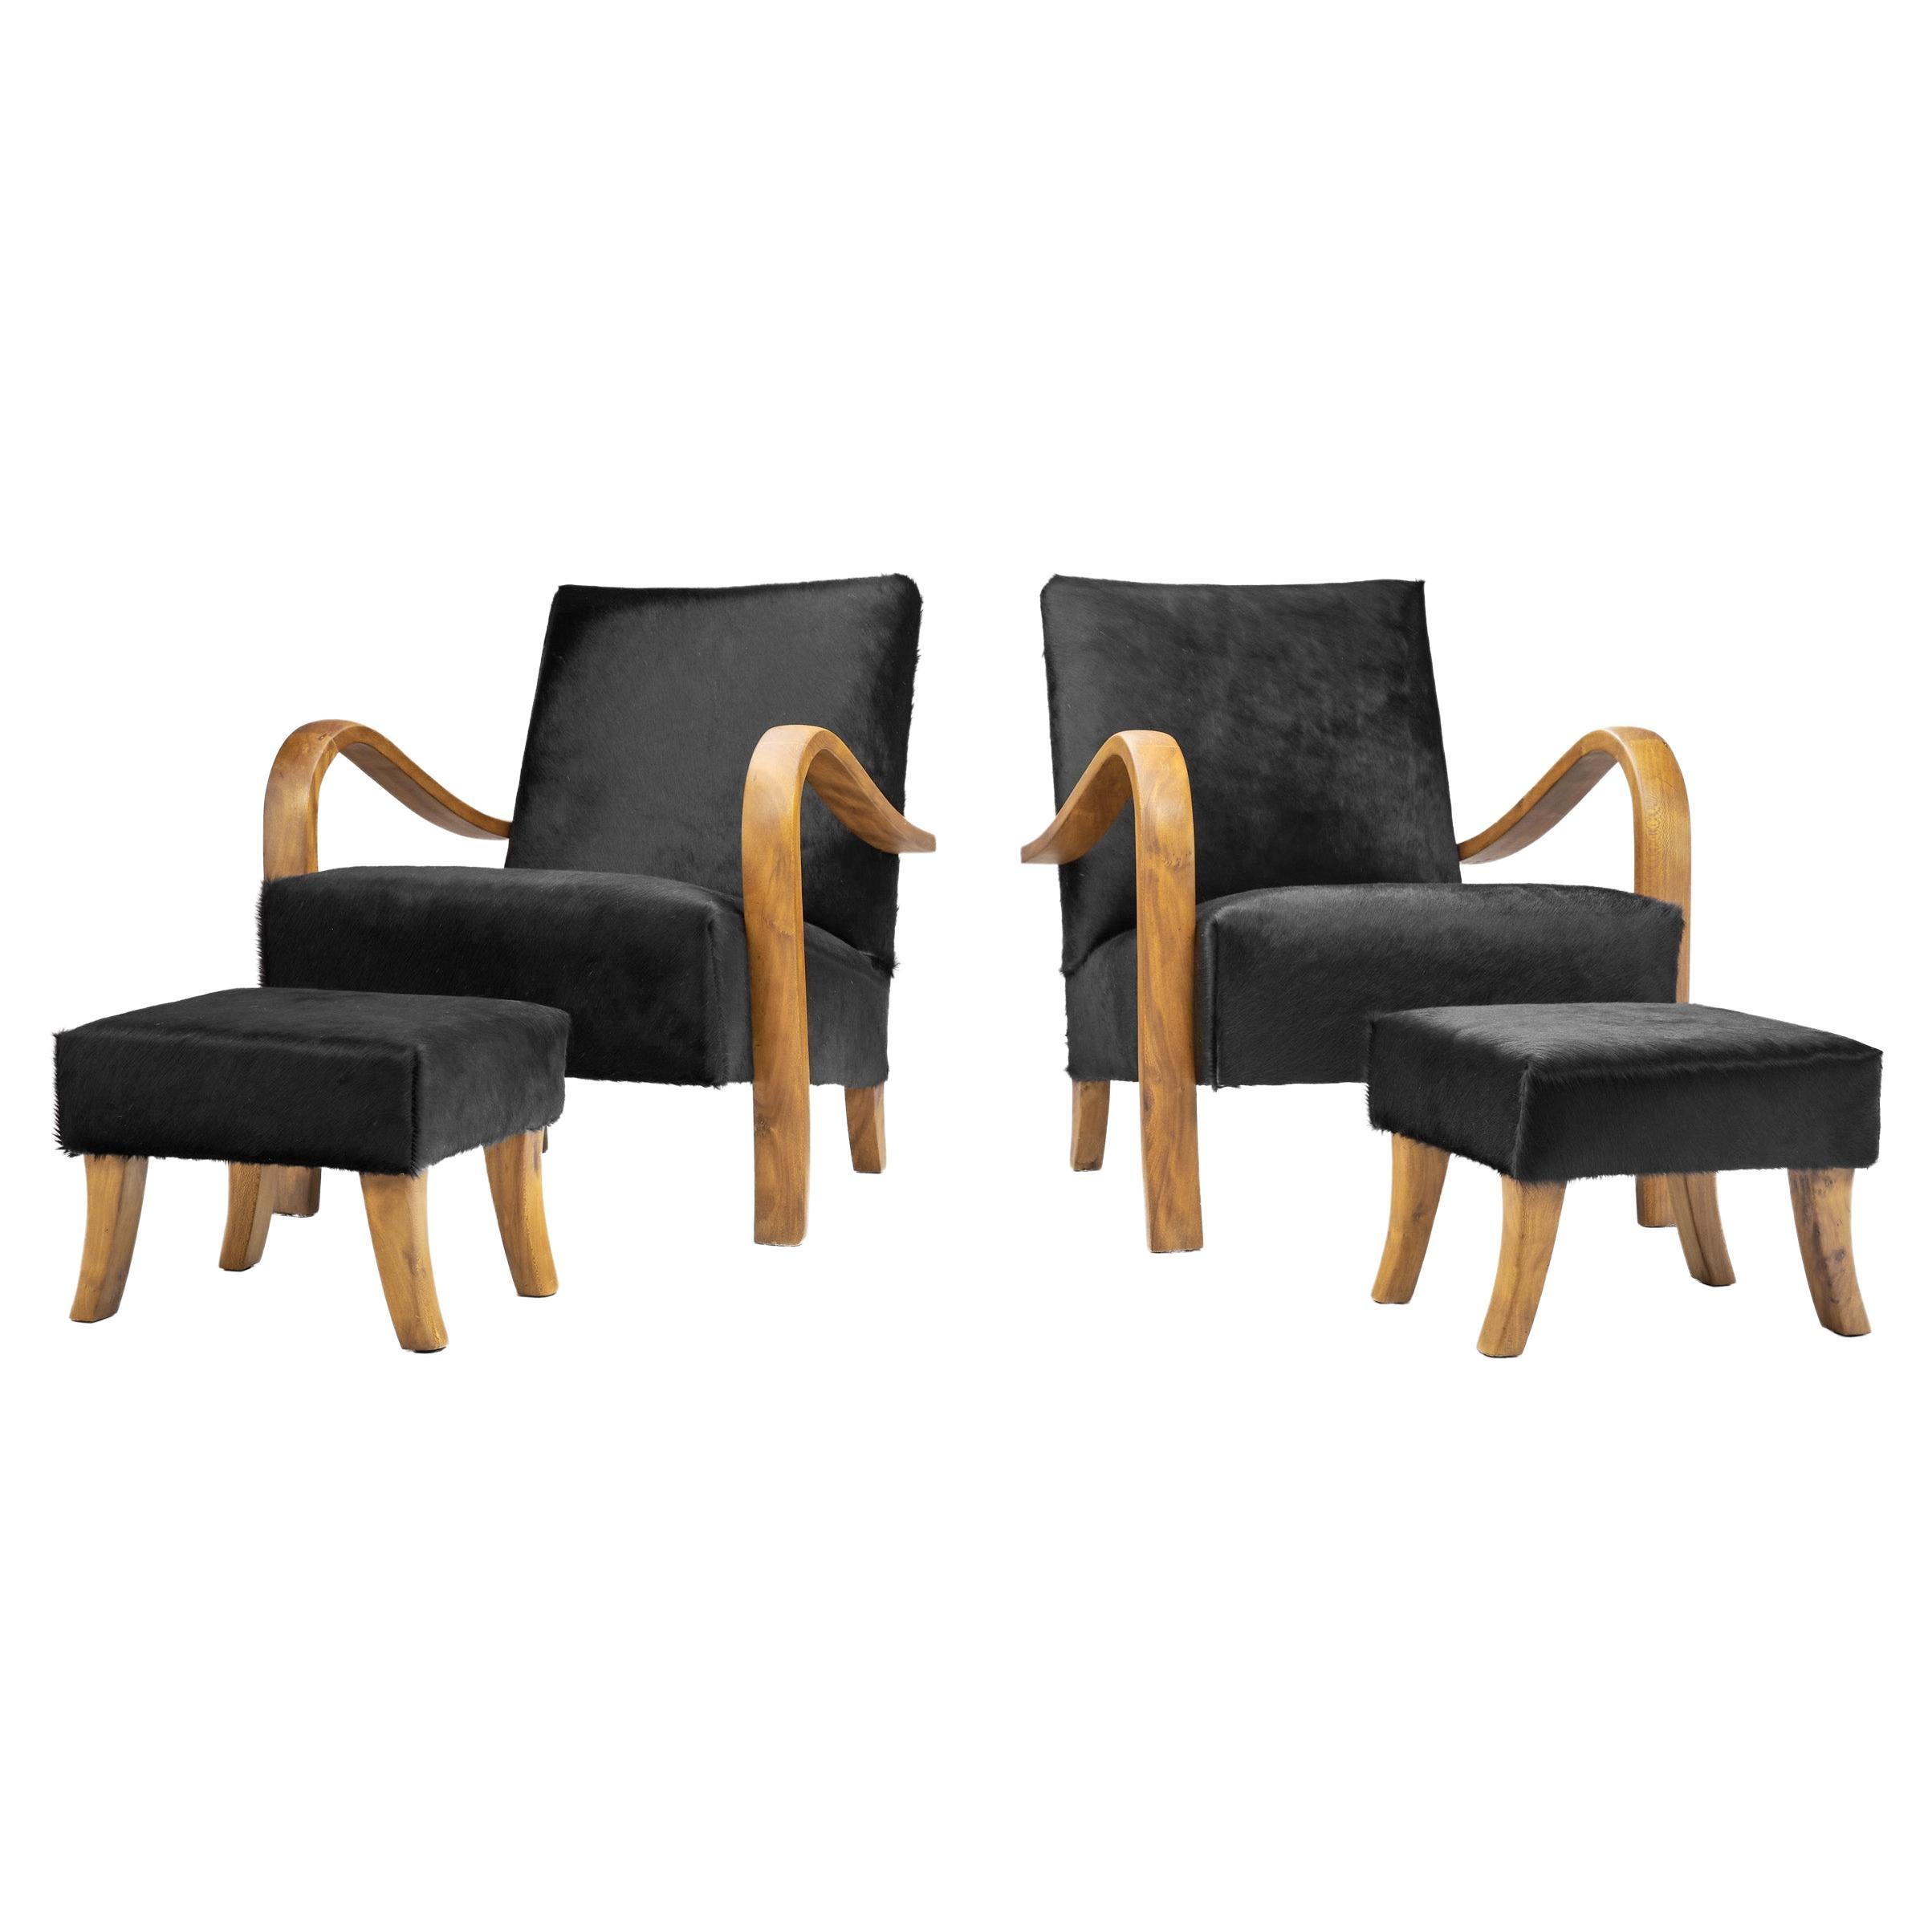 Italian Cherry Wood Lounge Chairs with Foot Stools in Dark Cowhide, Italy 1950s For Sale